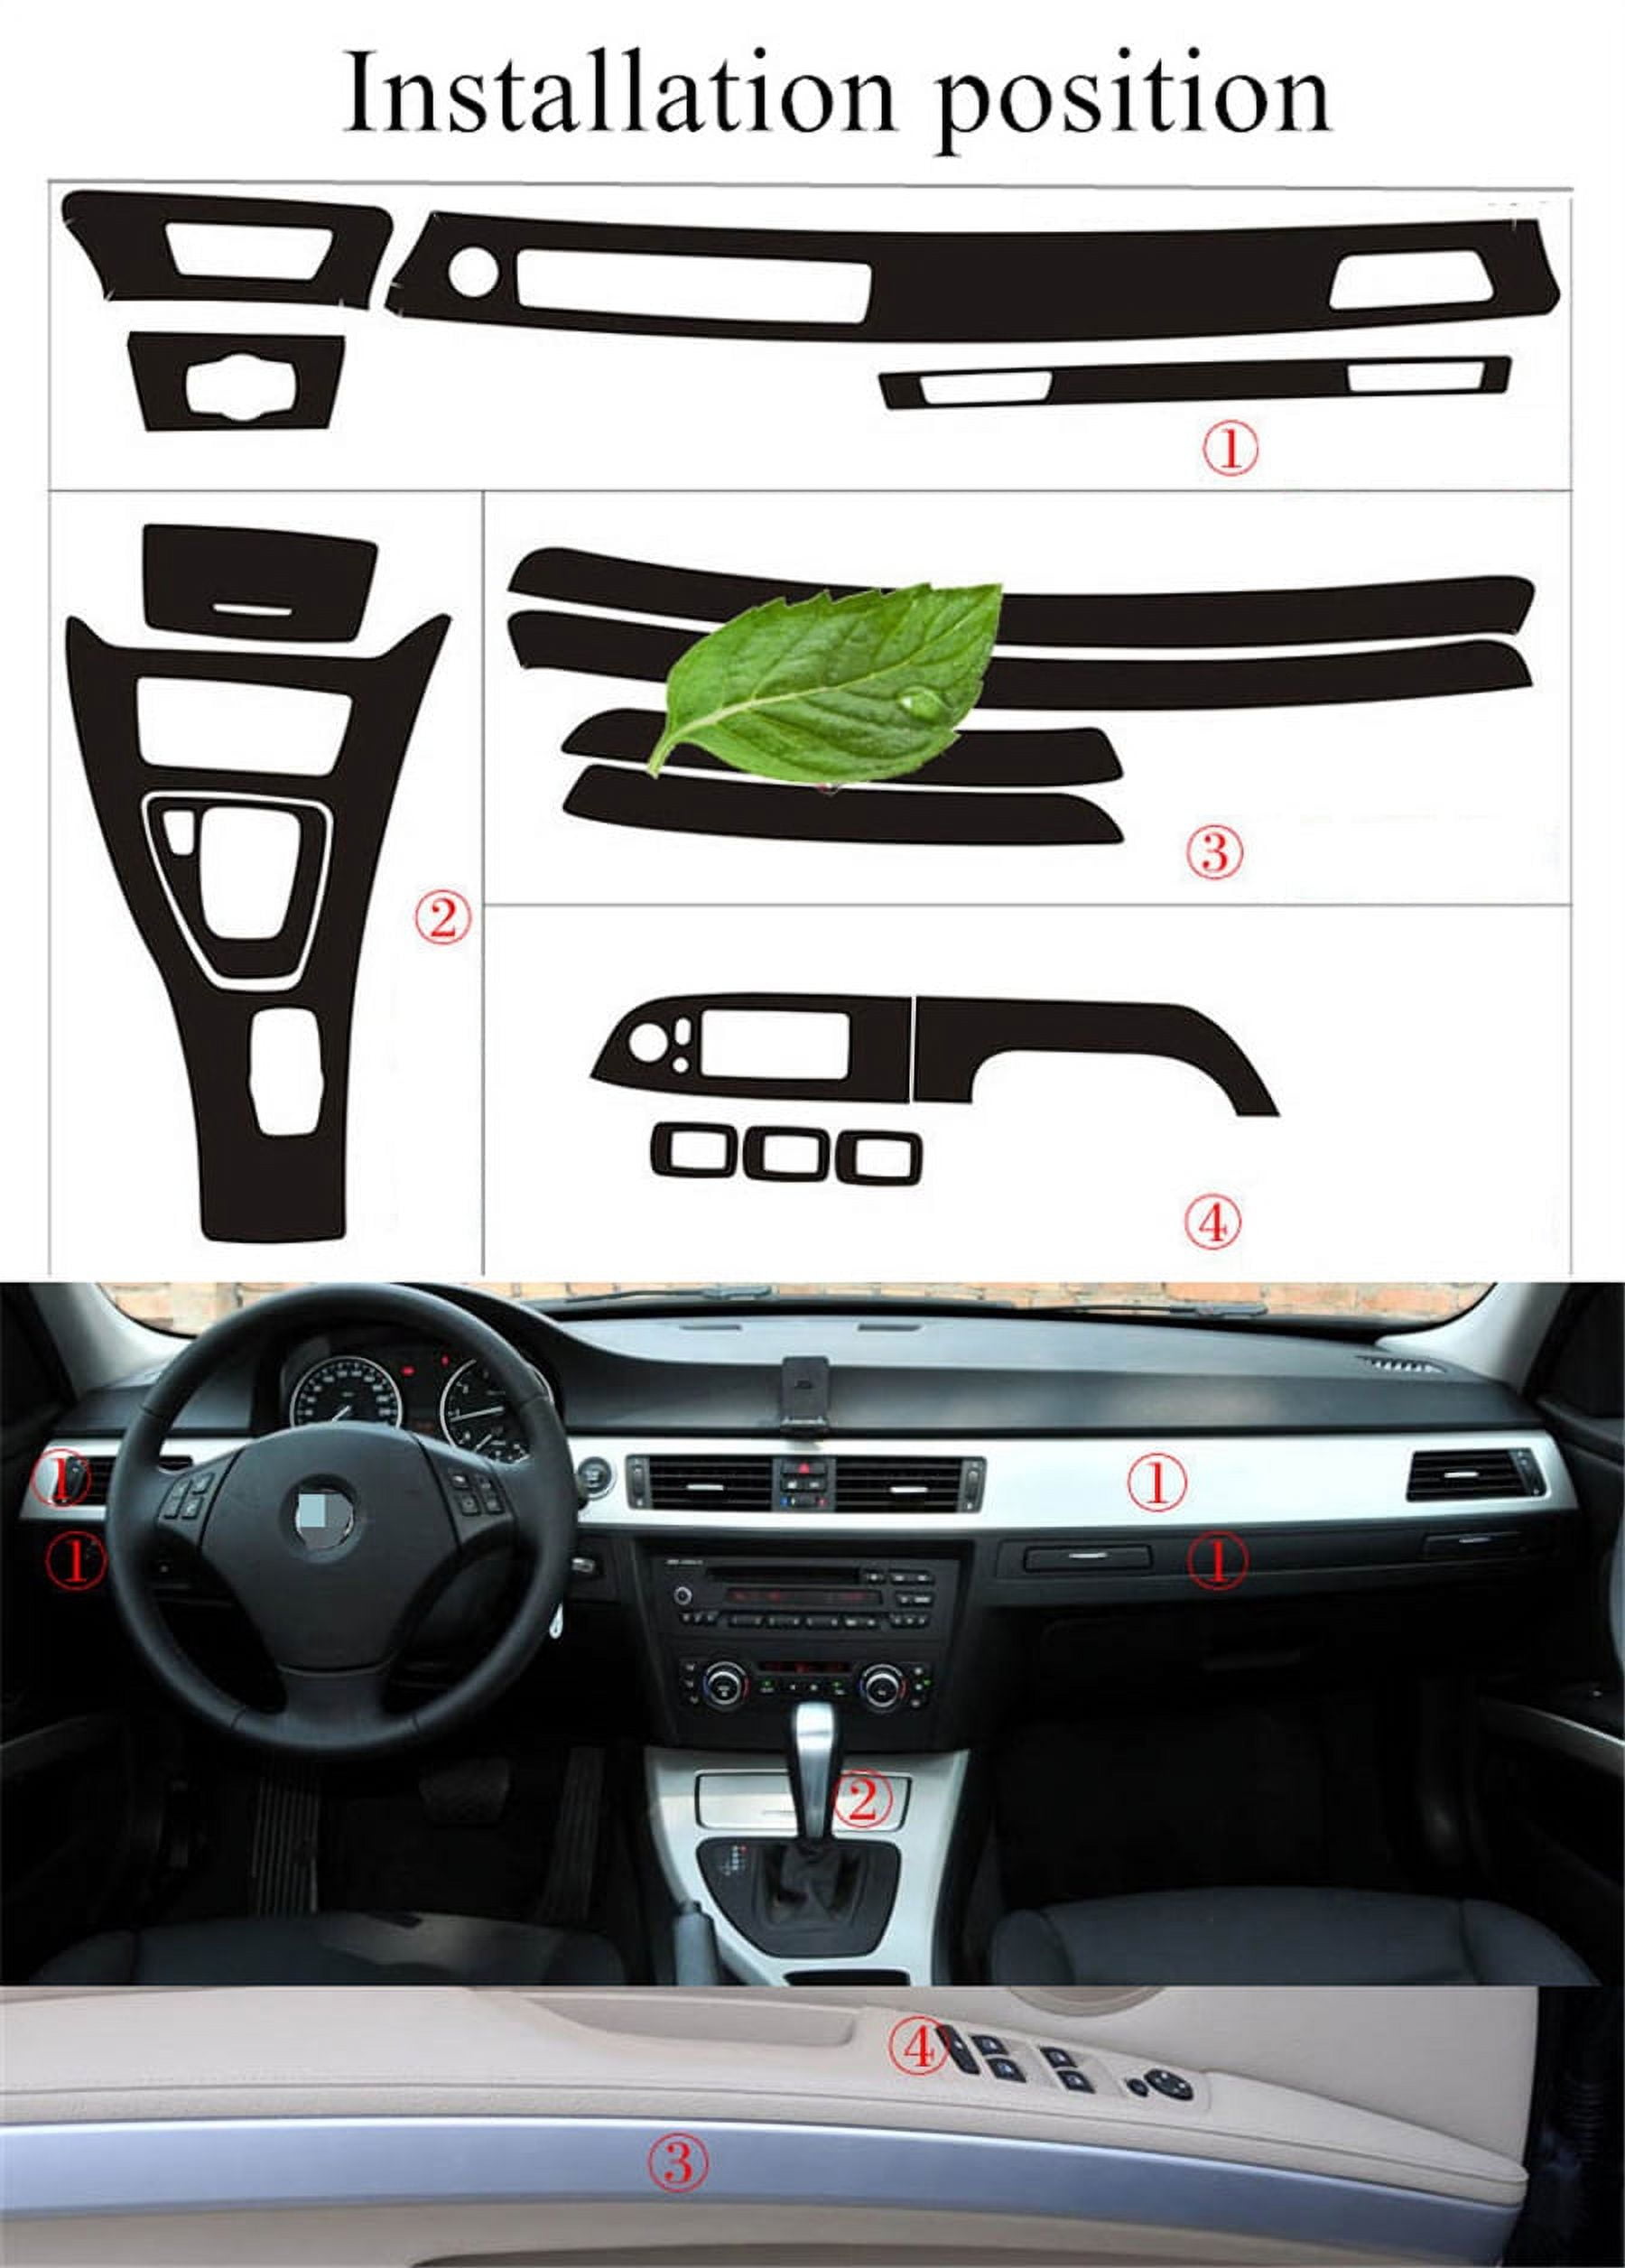 Amazon.com: YIWANG ABS Carbon Fiber Car Interior Dashboard Panel Cover Trim  Decoration Stickers for BMW 3 Series E90 2005-2012 Auto Accessories :  Automotive